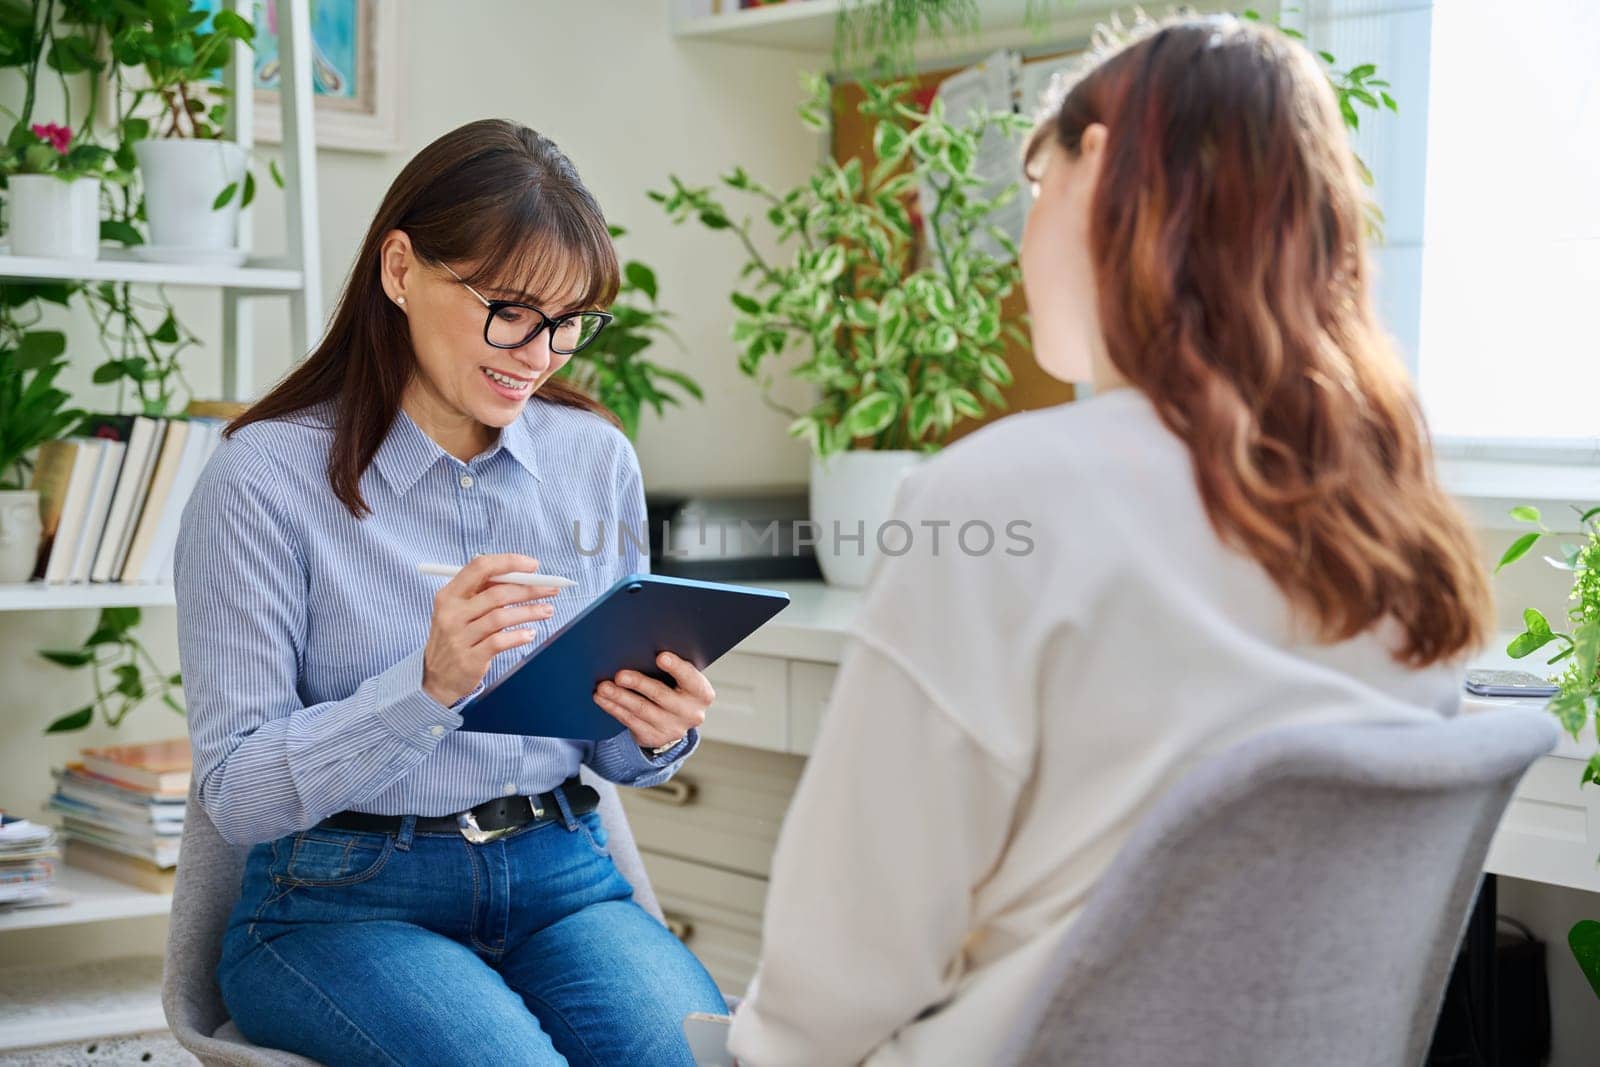 Professional mental therapist, psychologist, counselor, social worker working with young woman sitting together in office. Psychology, psychotherapy, therapy, mental assistance support treatment